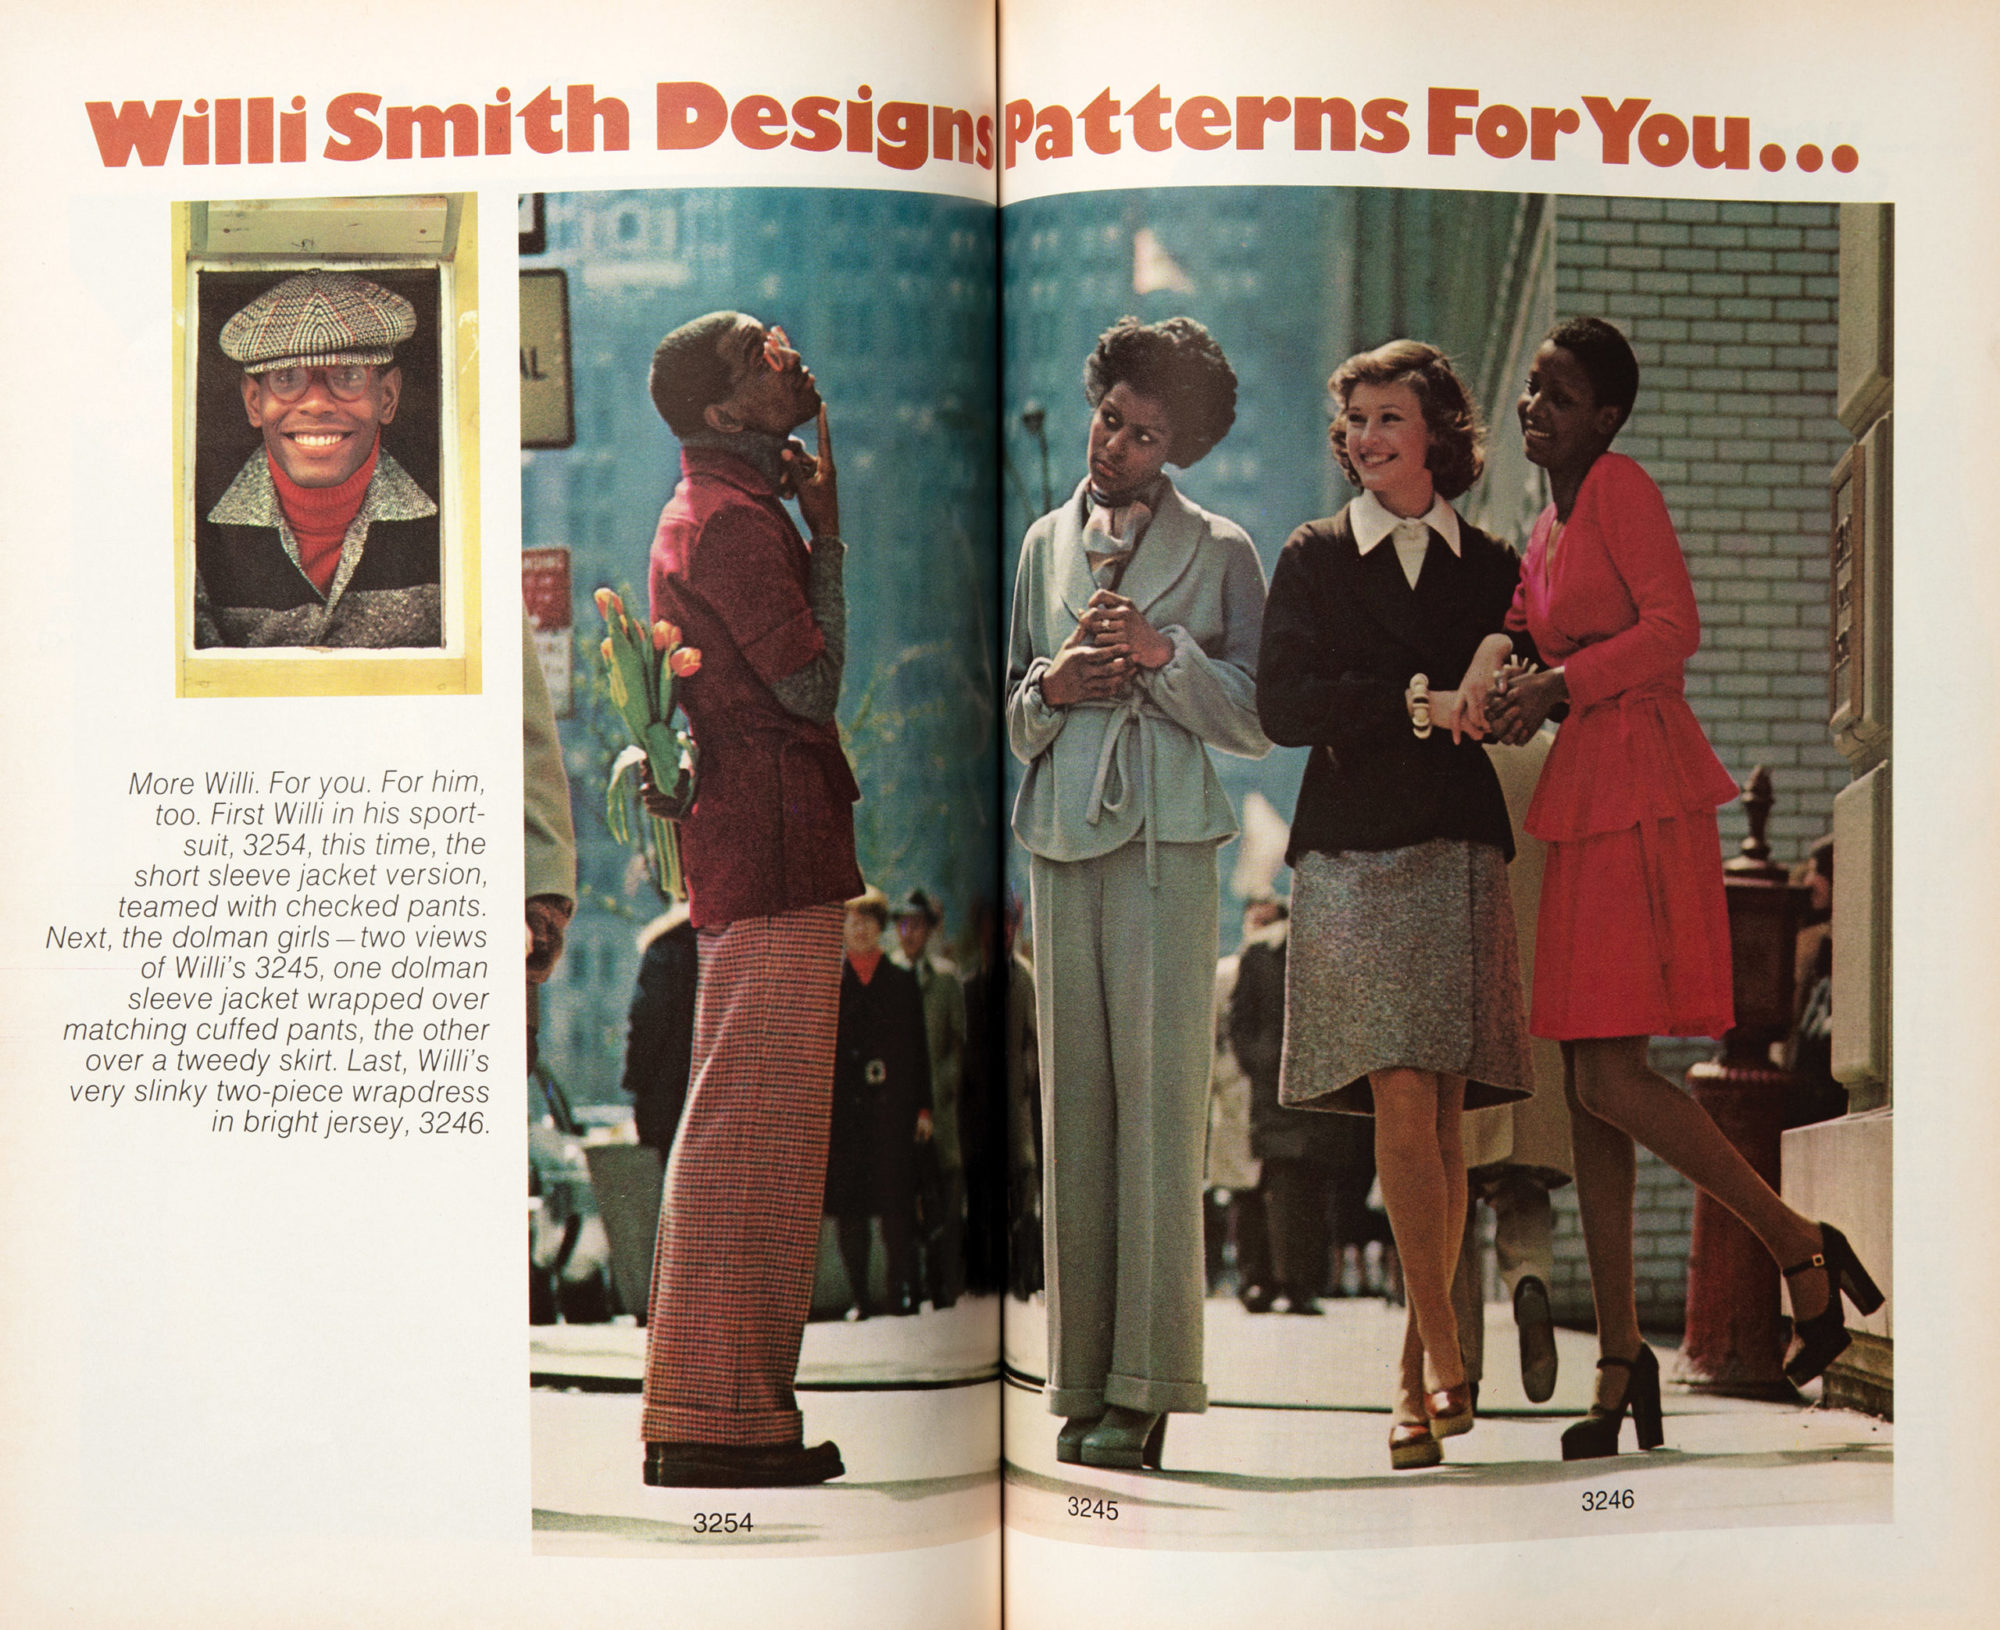 Butterick catalog image of Willi Smith in short-sleeved sports jacket and long pants standing beside three female models in jackets, pants, a skirt, and two-piece wrap dress